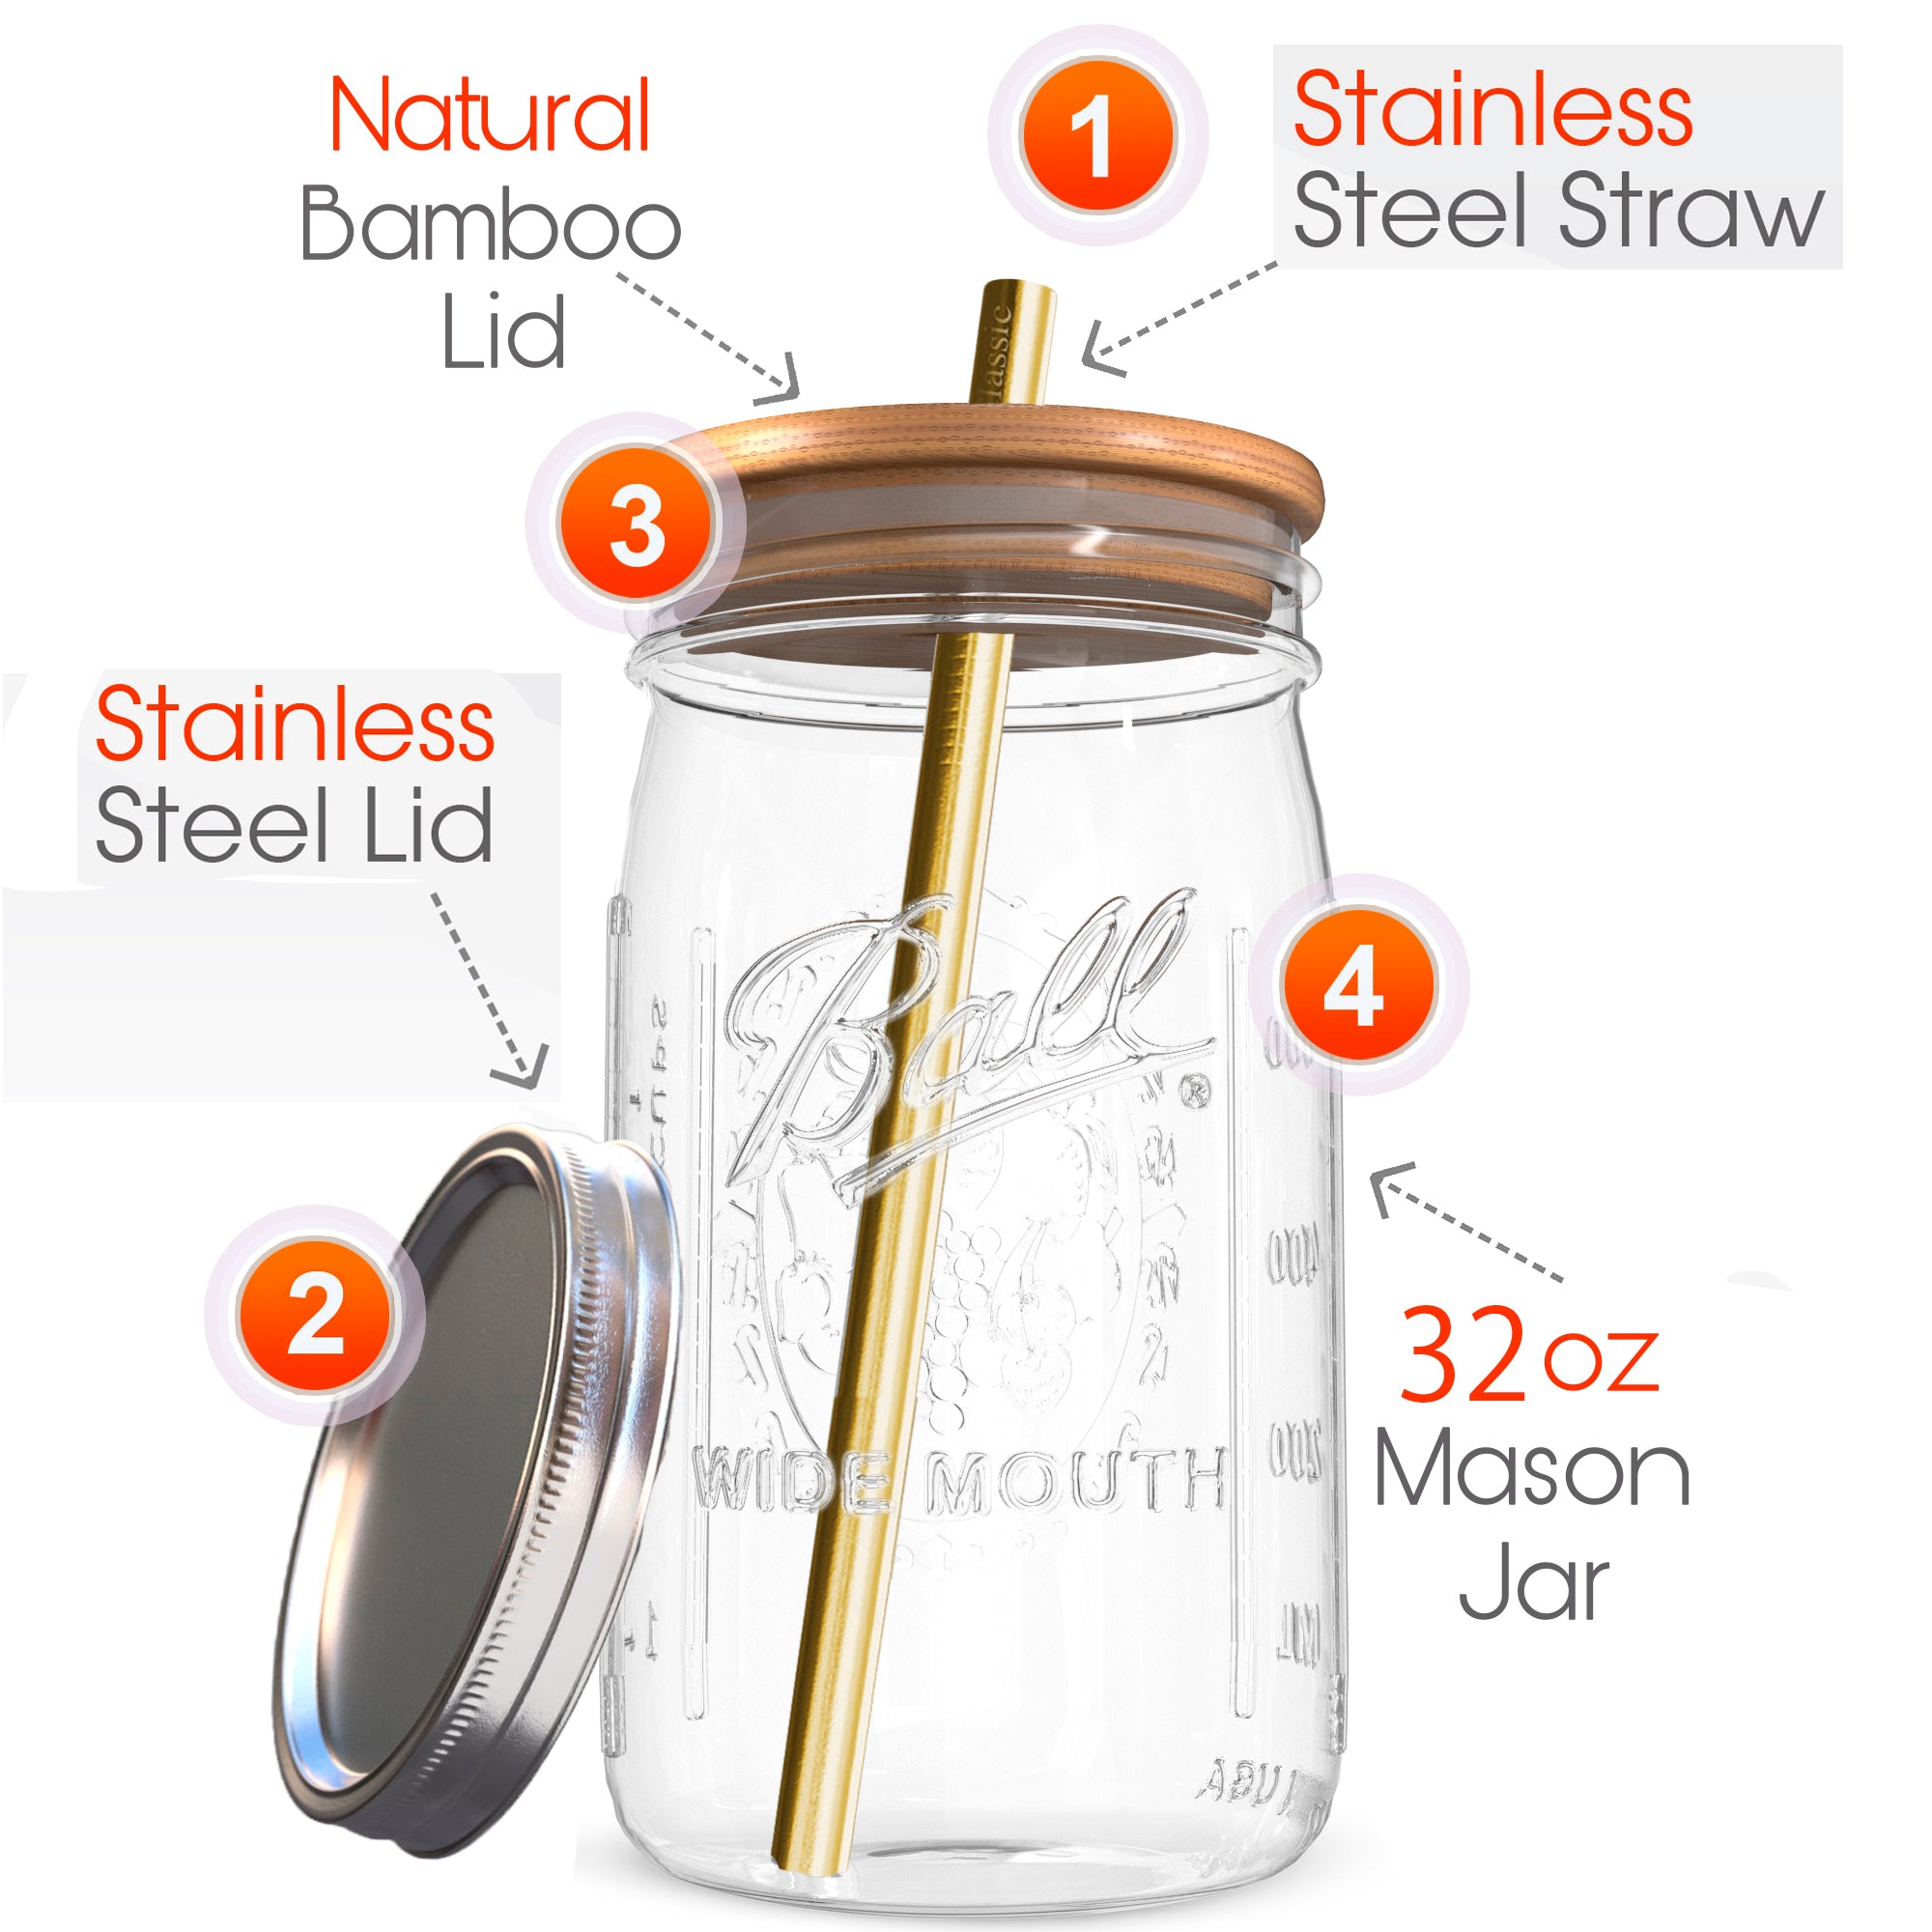 Reusable Wide Mouth Smoothie Cups Boba Bubble Tea Cups with Lids and Gold  Straws Mason Jars Glass Cups (2-pack, 24 oz )